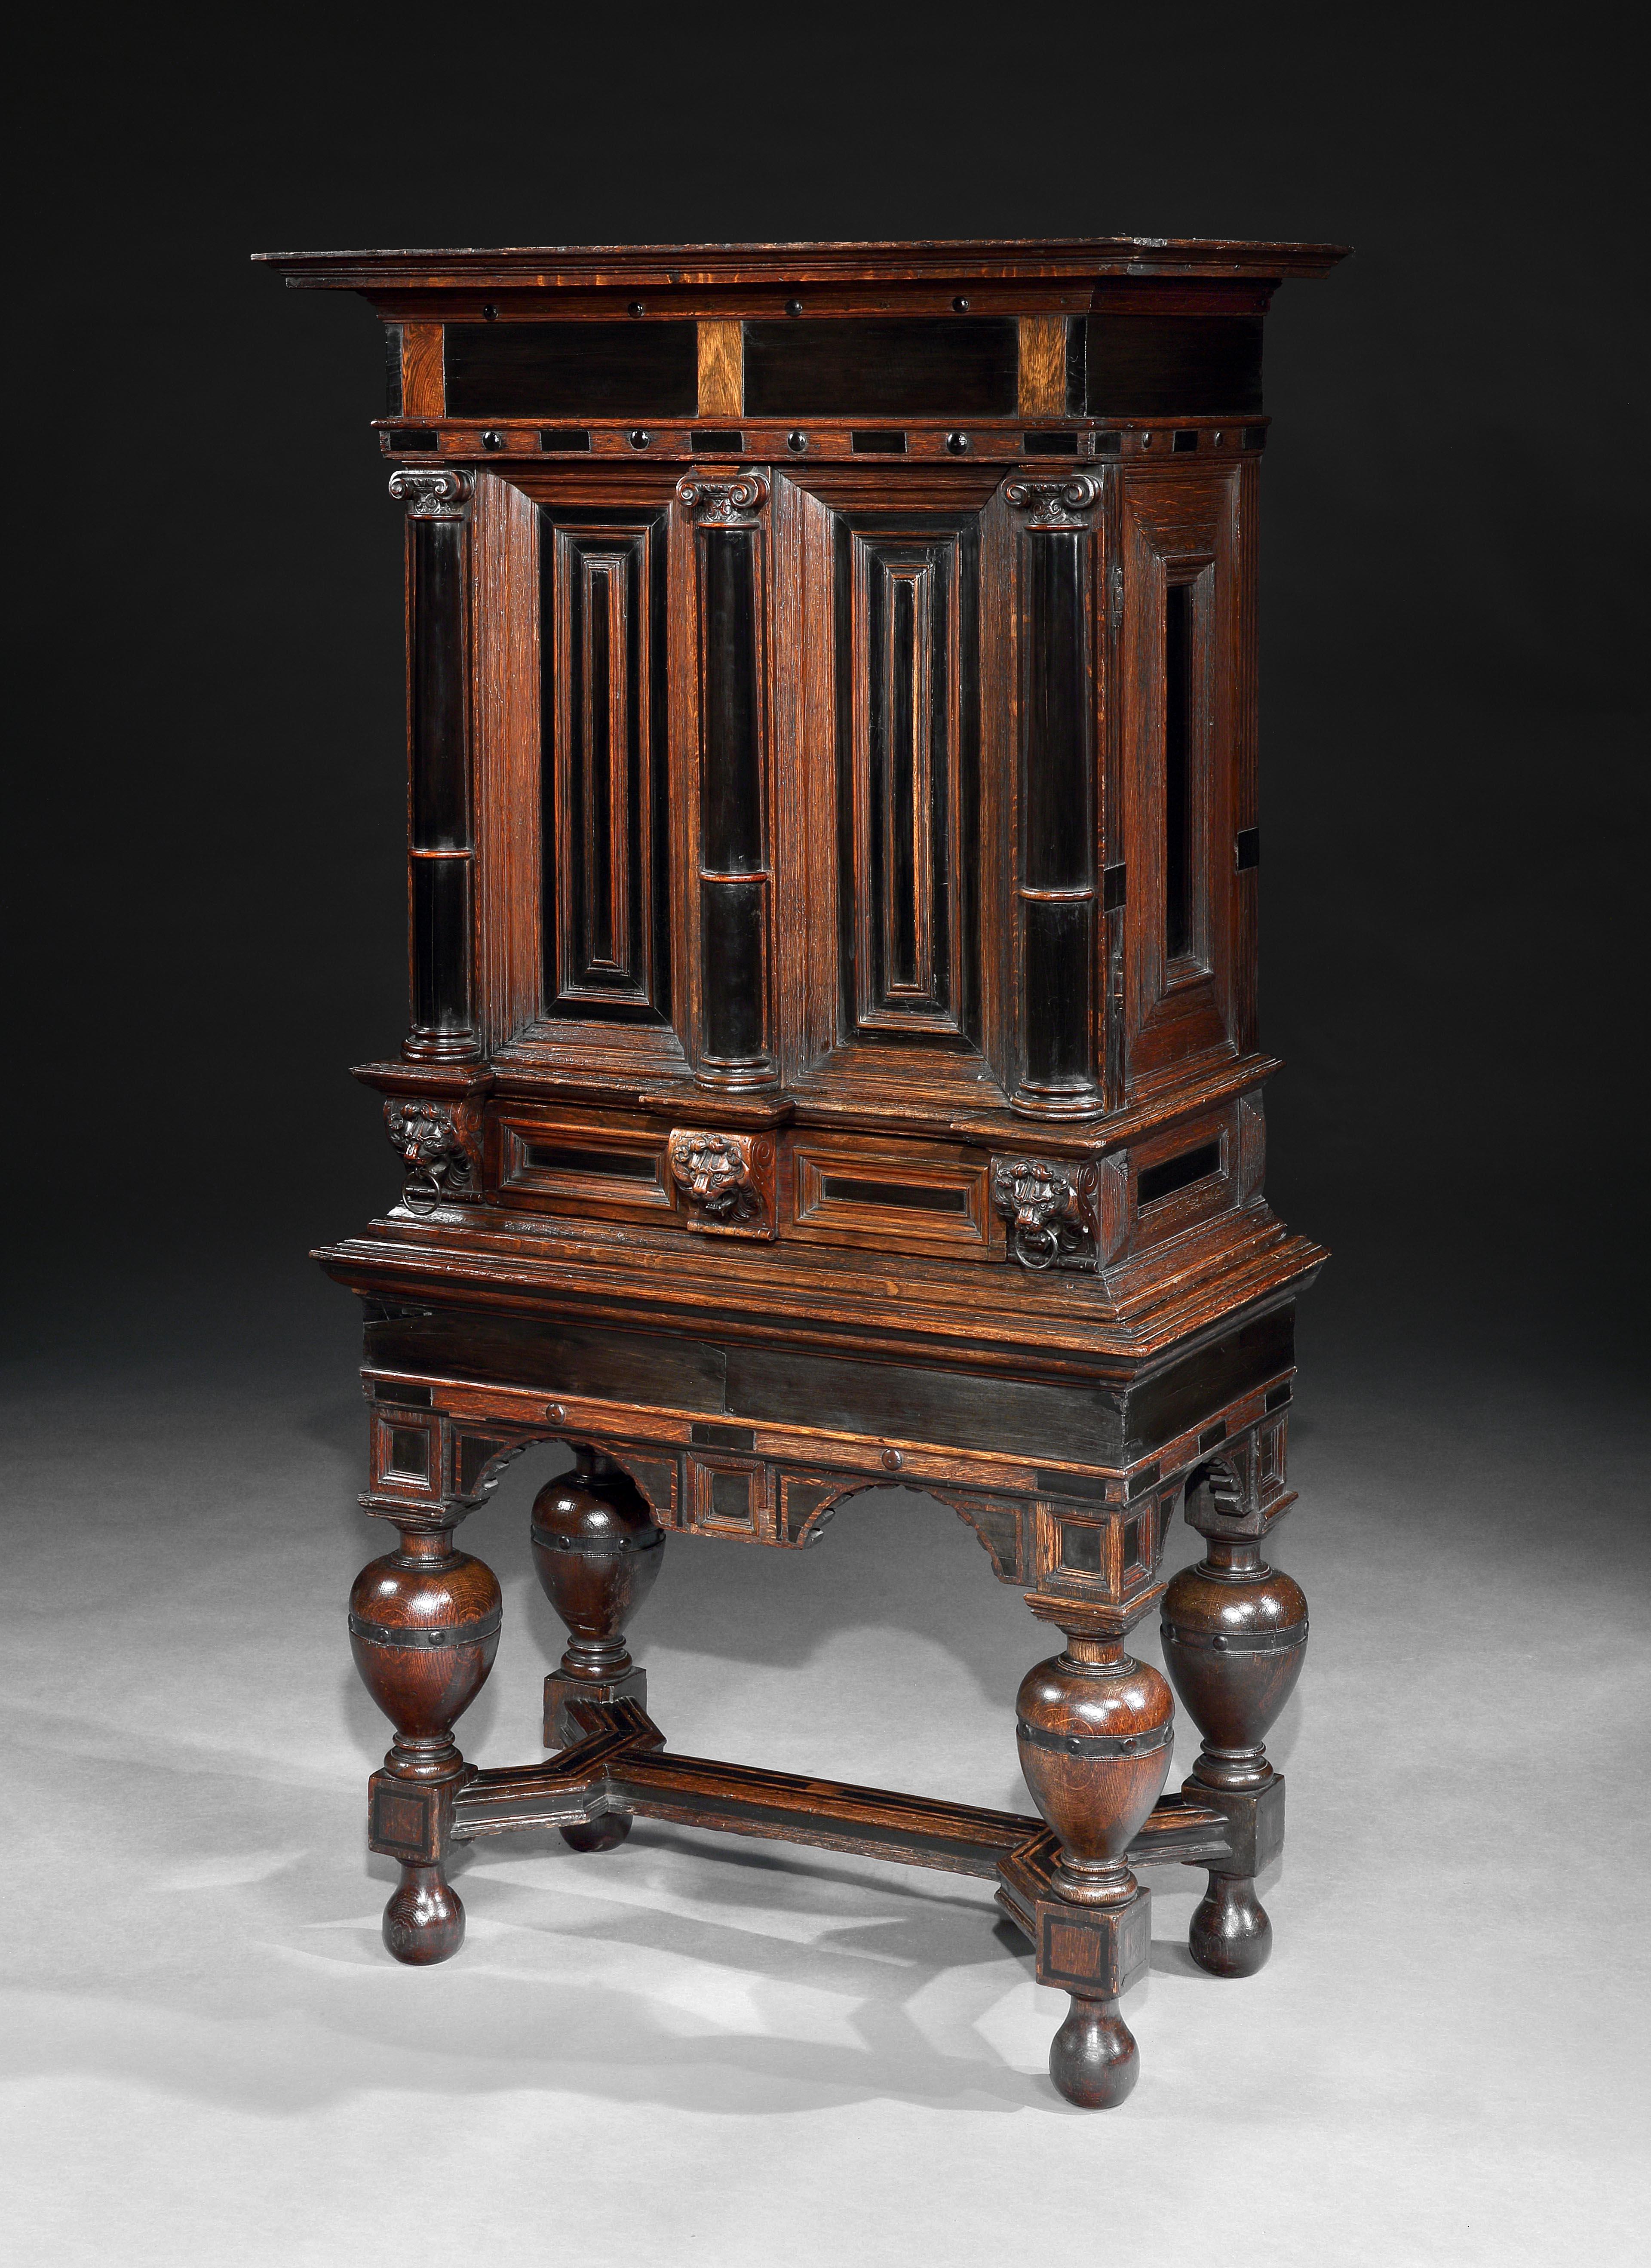 During the 17th century cabinets, along with a richly furnished bed, were the most important pieces of furniture in a Dutch home. This charming small cabinet would have either been placed in the Hall, which was the most important room in the house